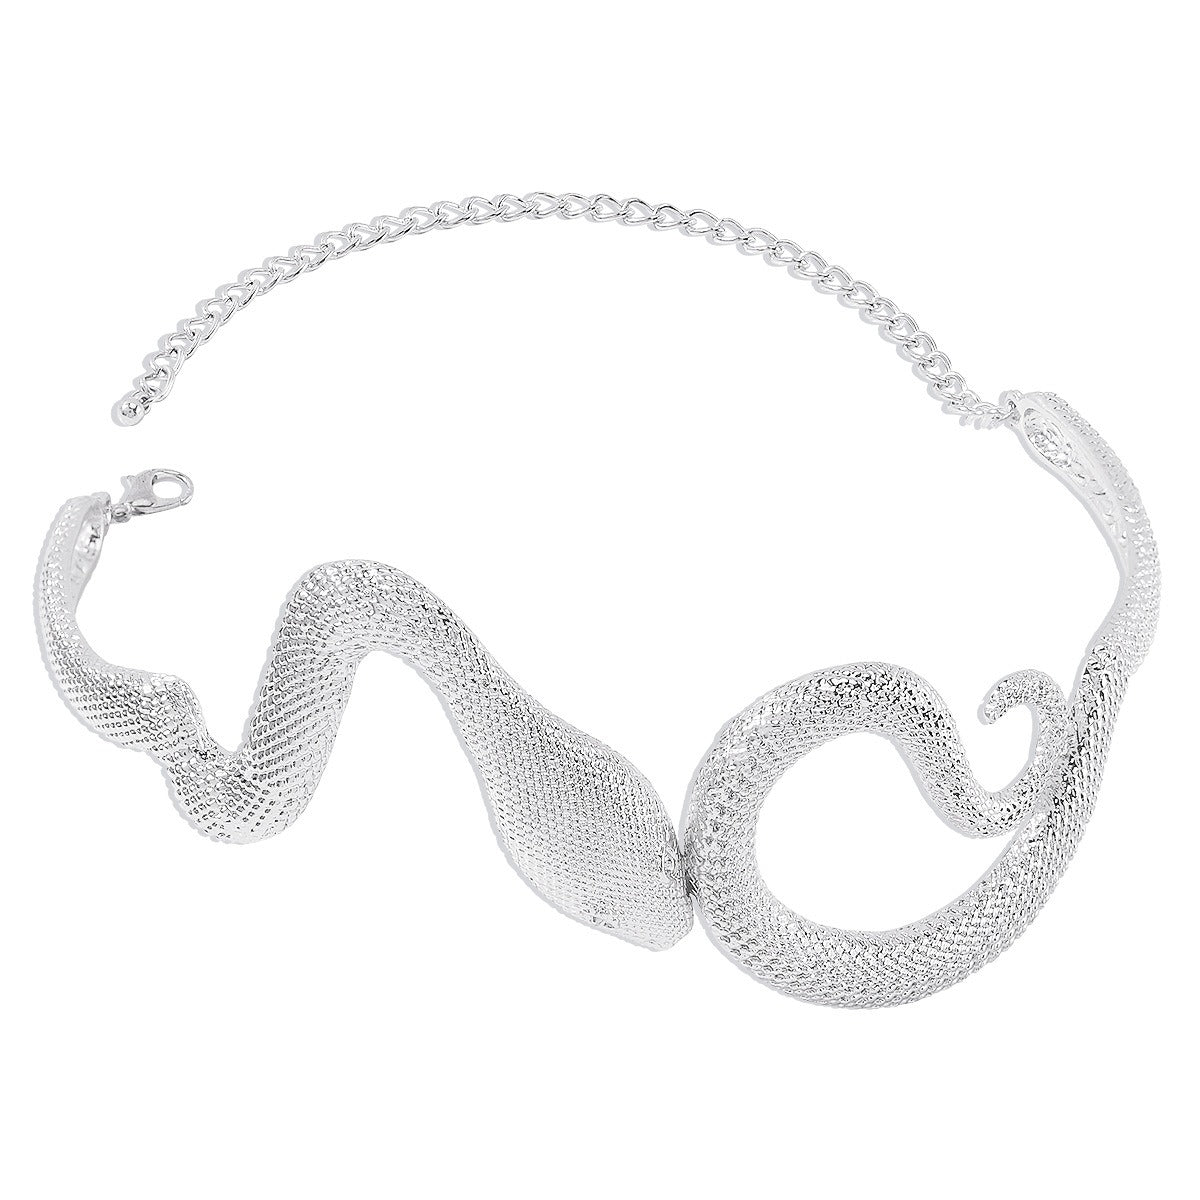 Serpentine Metal Carved Choker Necklace for Women | ULZZANG BELLA